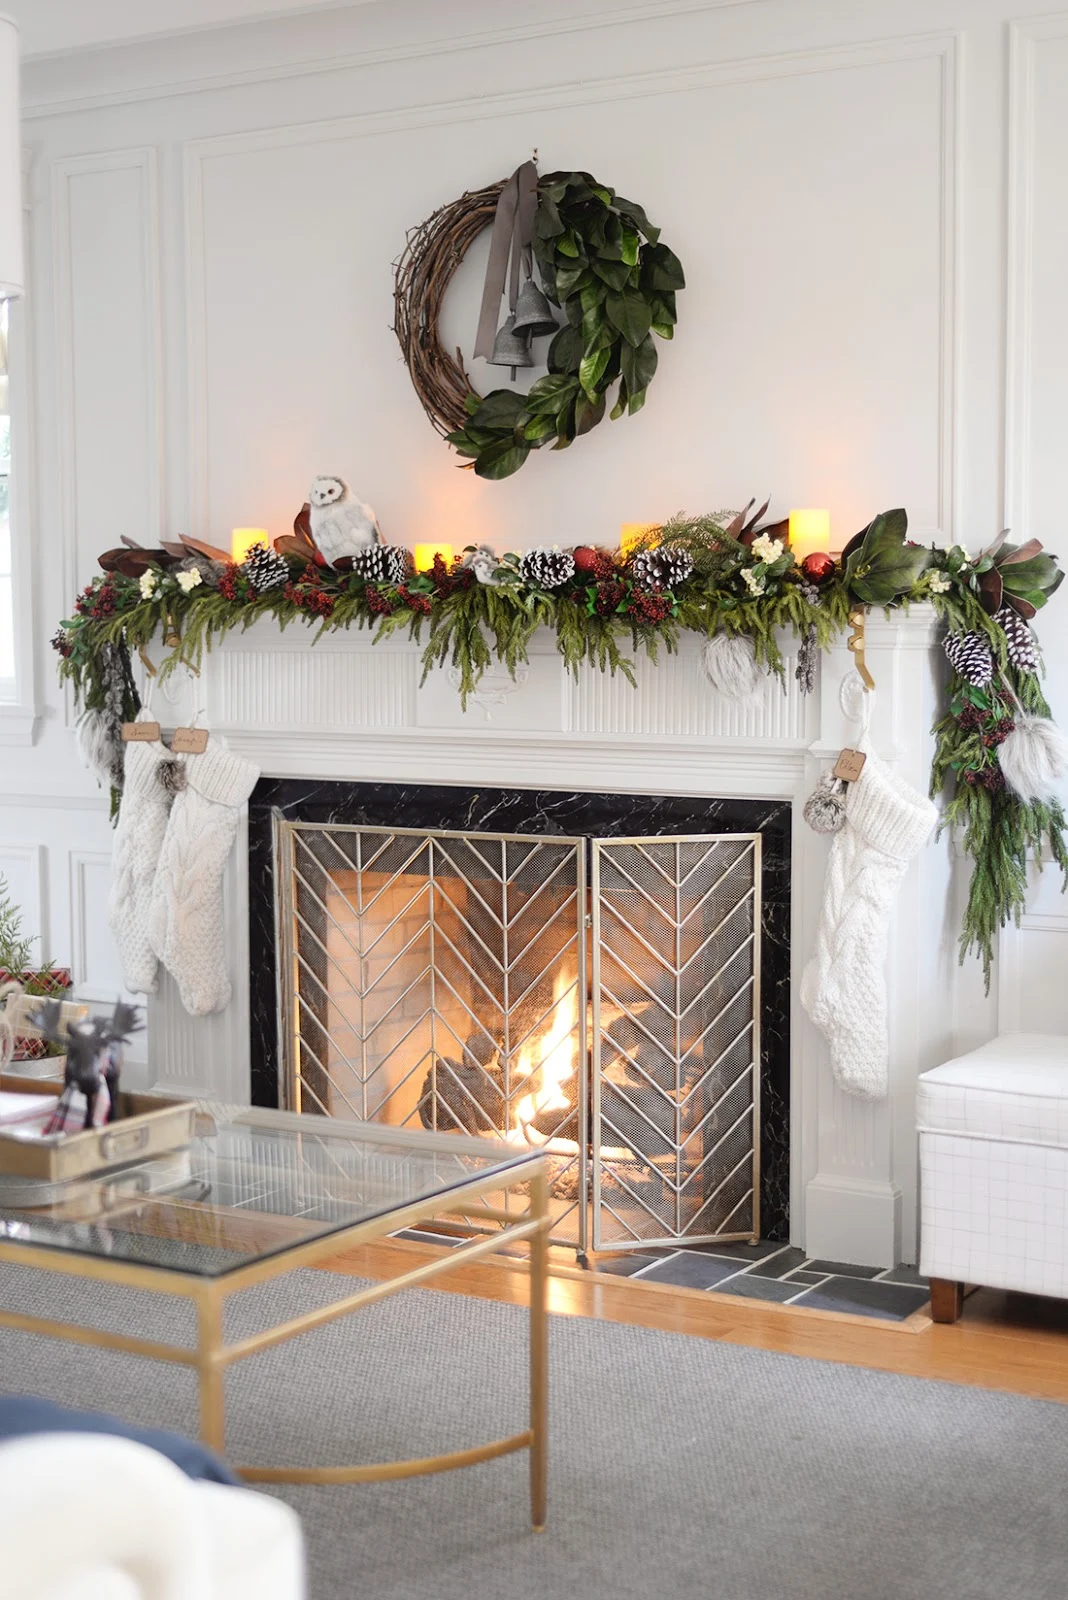 how to hang garland on mantle, how to hang garland on mantel, hang christmas garland, garland on fireplace mantel